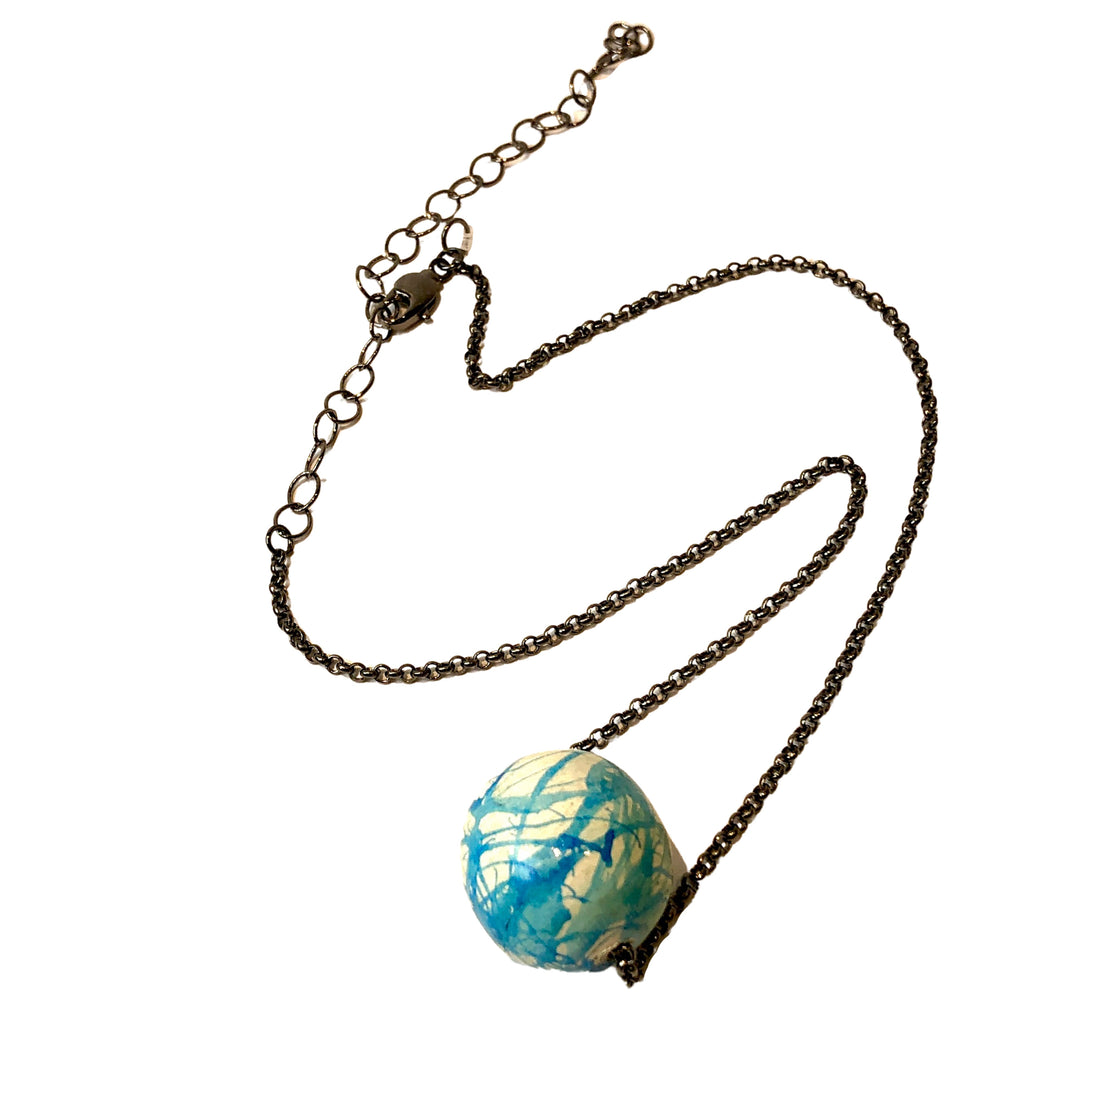 Paint Spatter Bead Dark Metal Chain Necklace